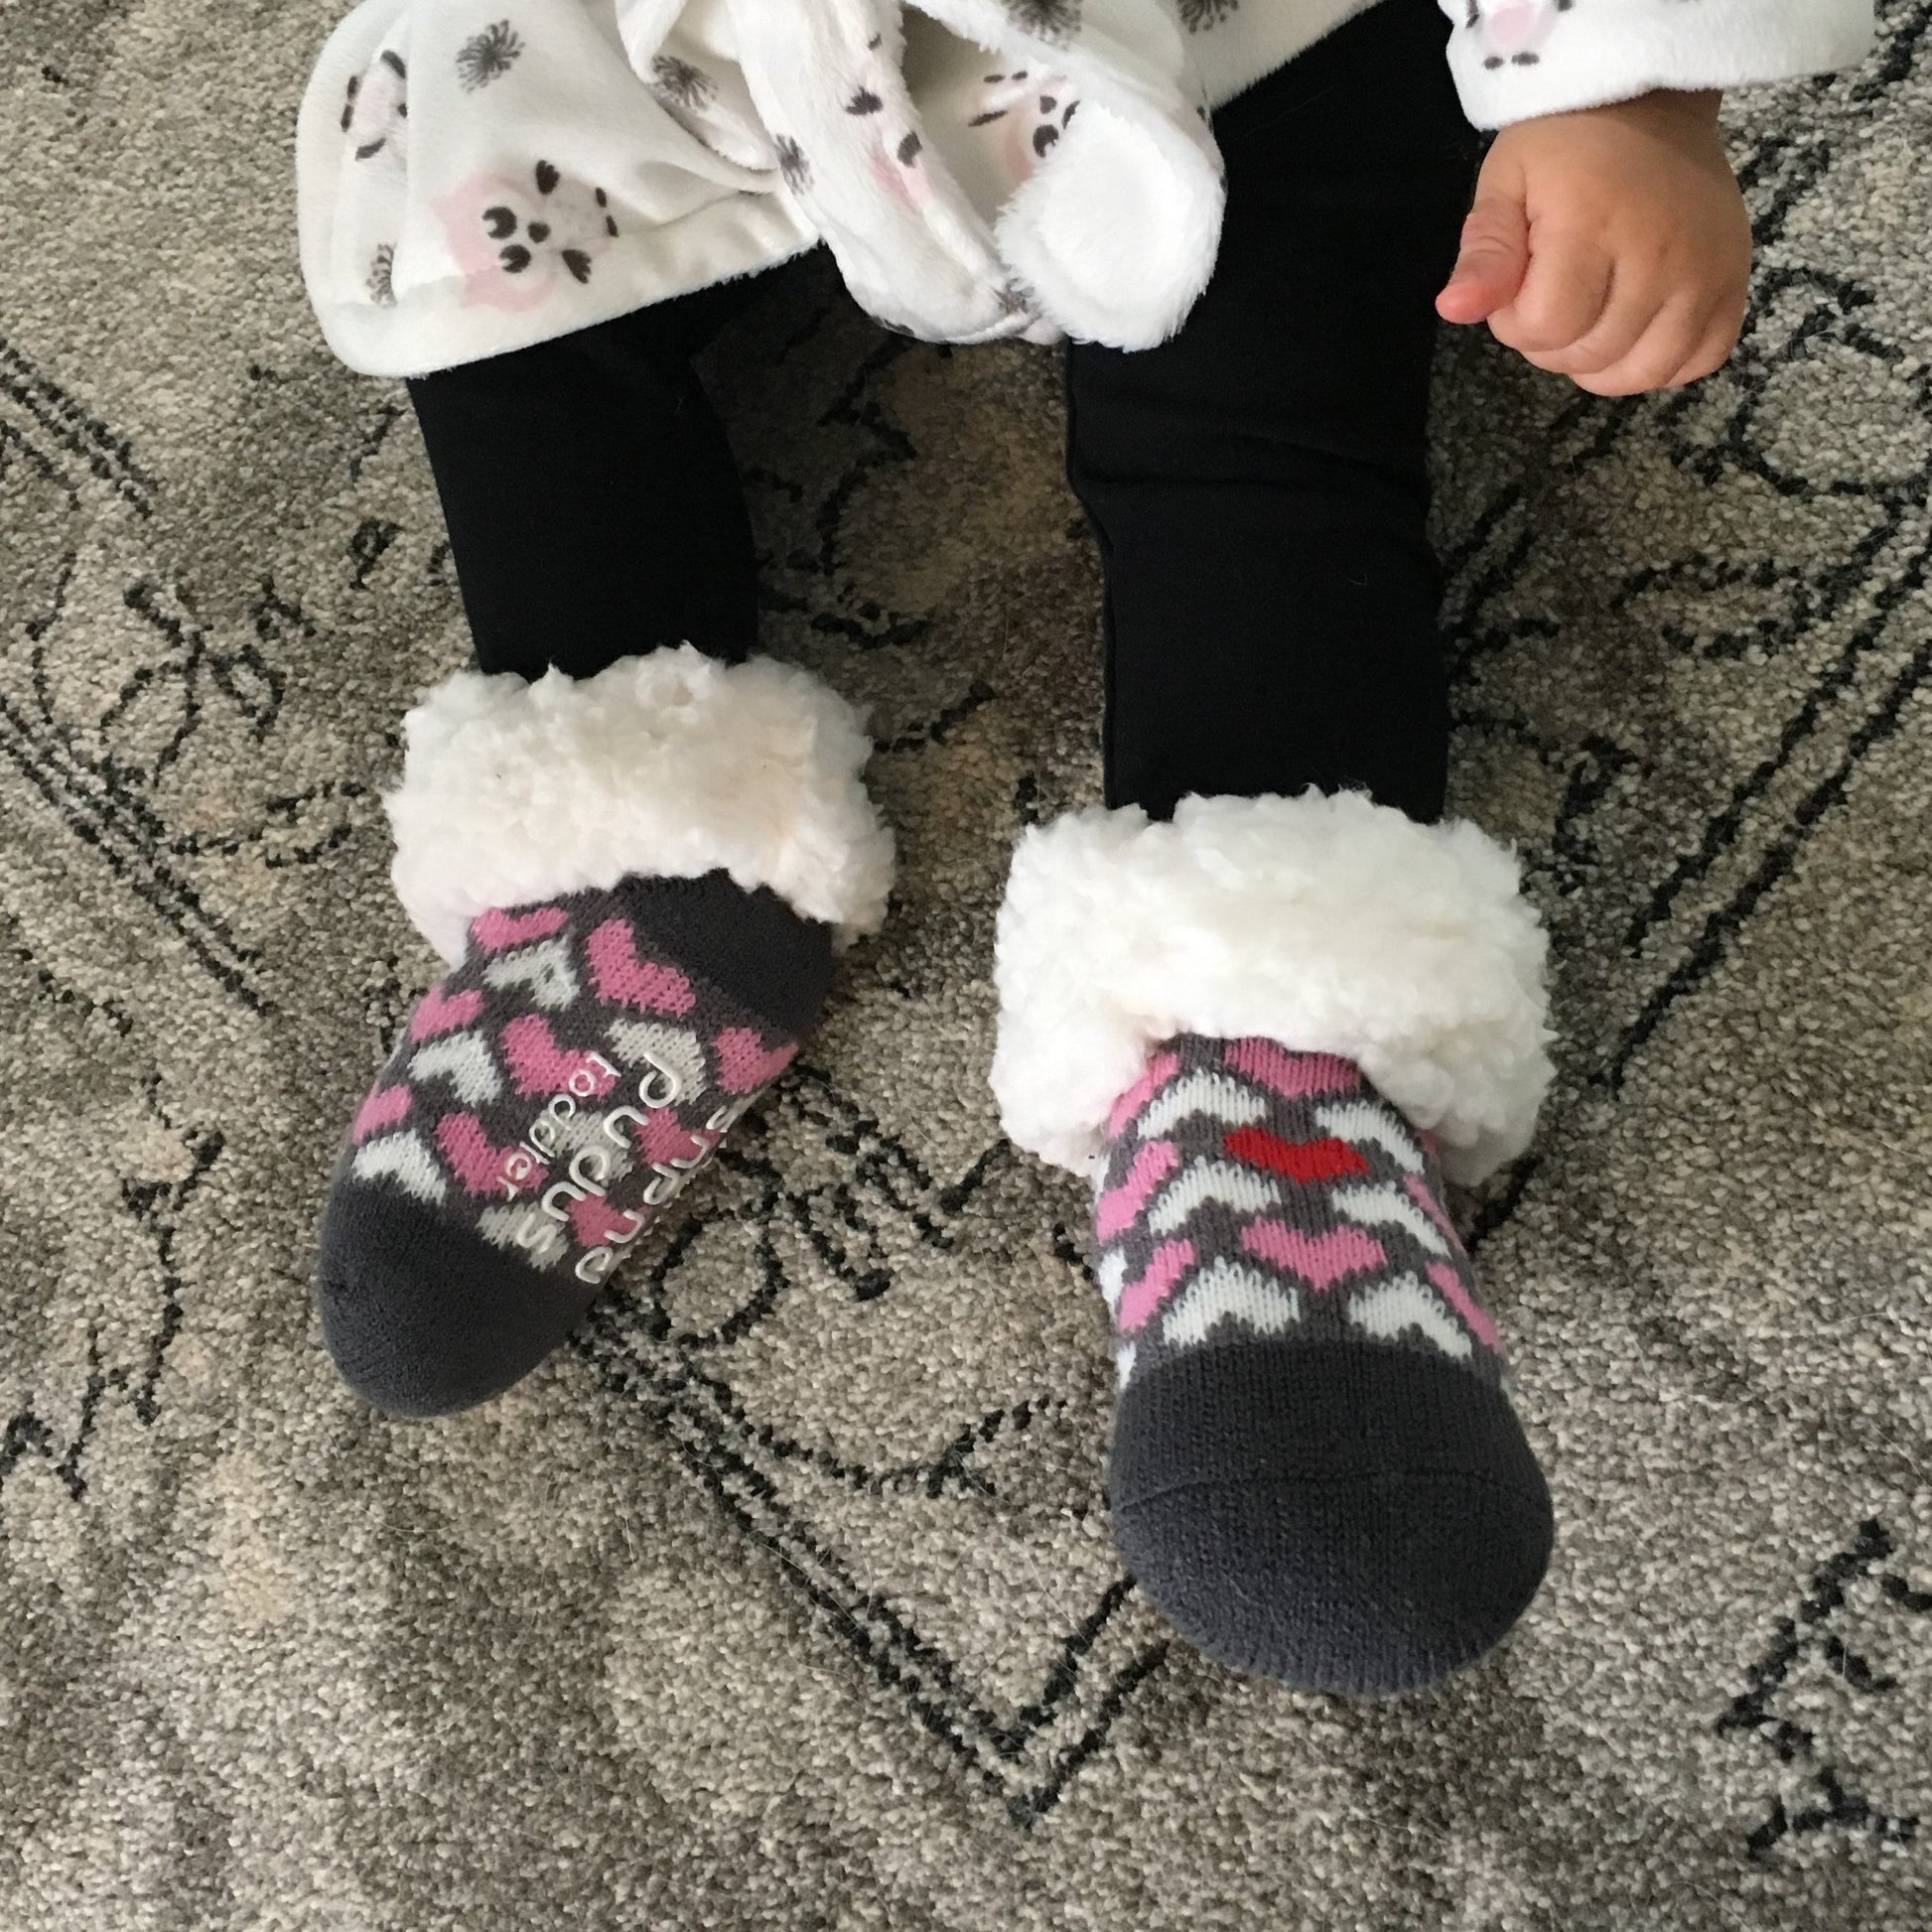 Pudus Cozy Winter Slipper Socks for Toddlers with Non-Slip Grippers and Faux Fur Sherpa Fleece - Baby Boy and Girl Fuzzy Socks (Ages 1-3) Be My Valentine - Toddler Classic Slipper Sock